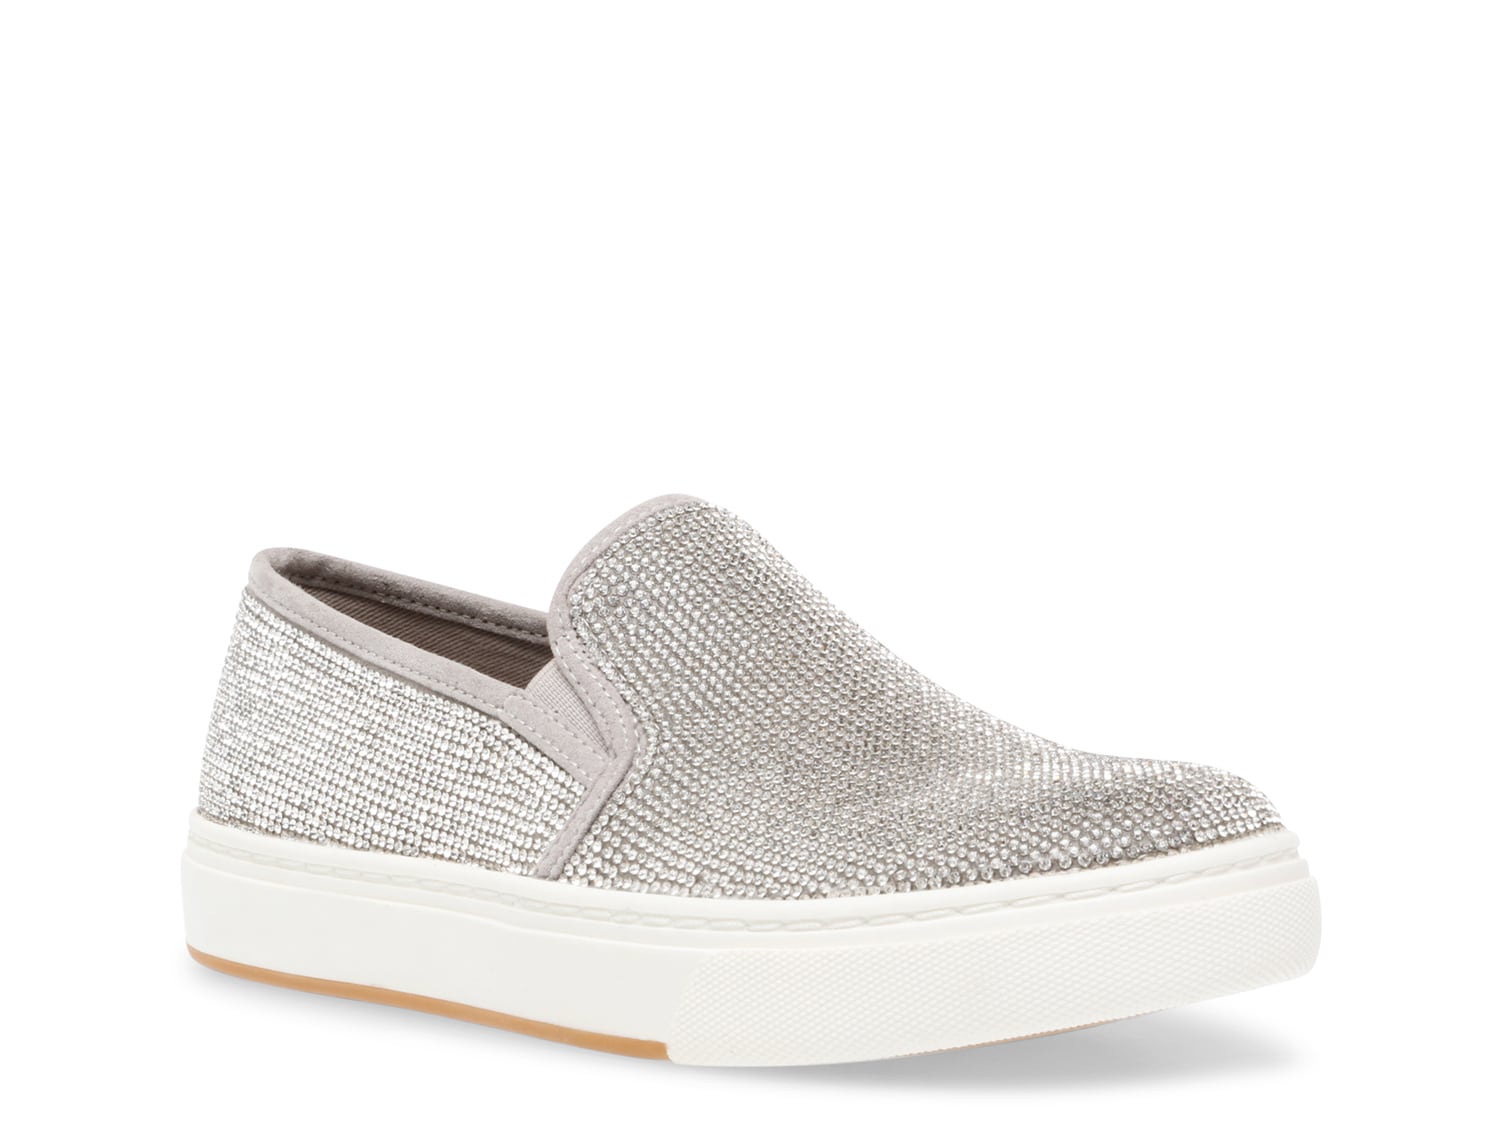 silver slip on shoes womens